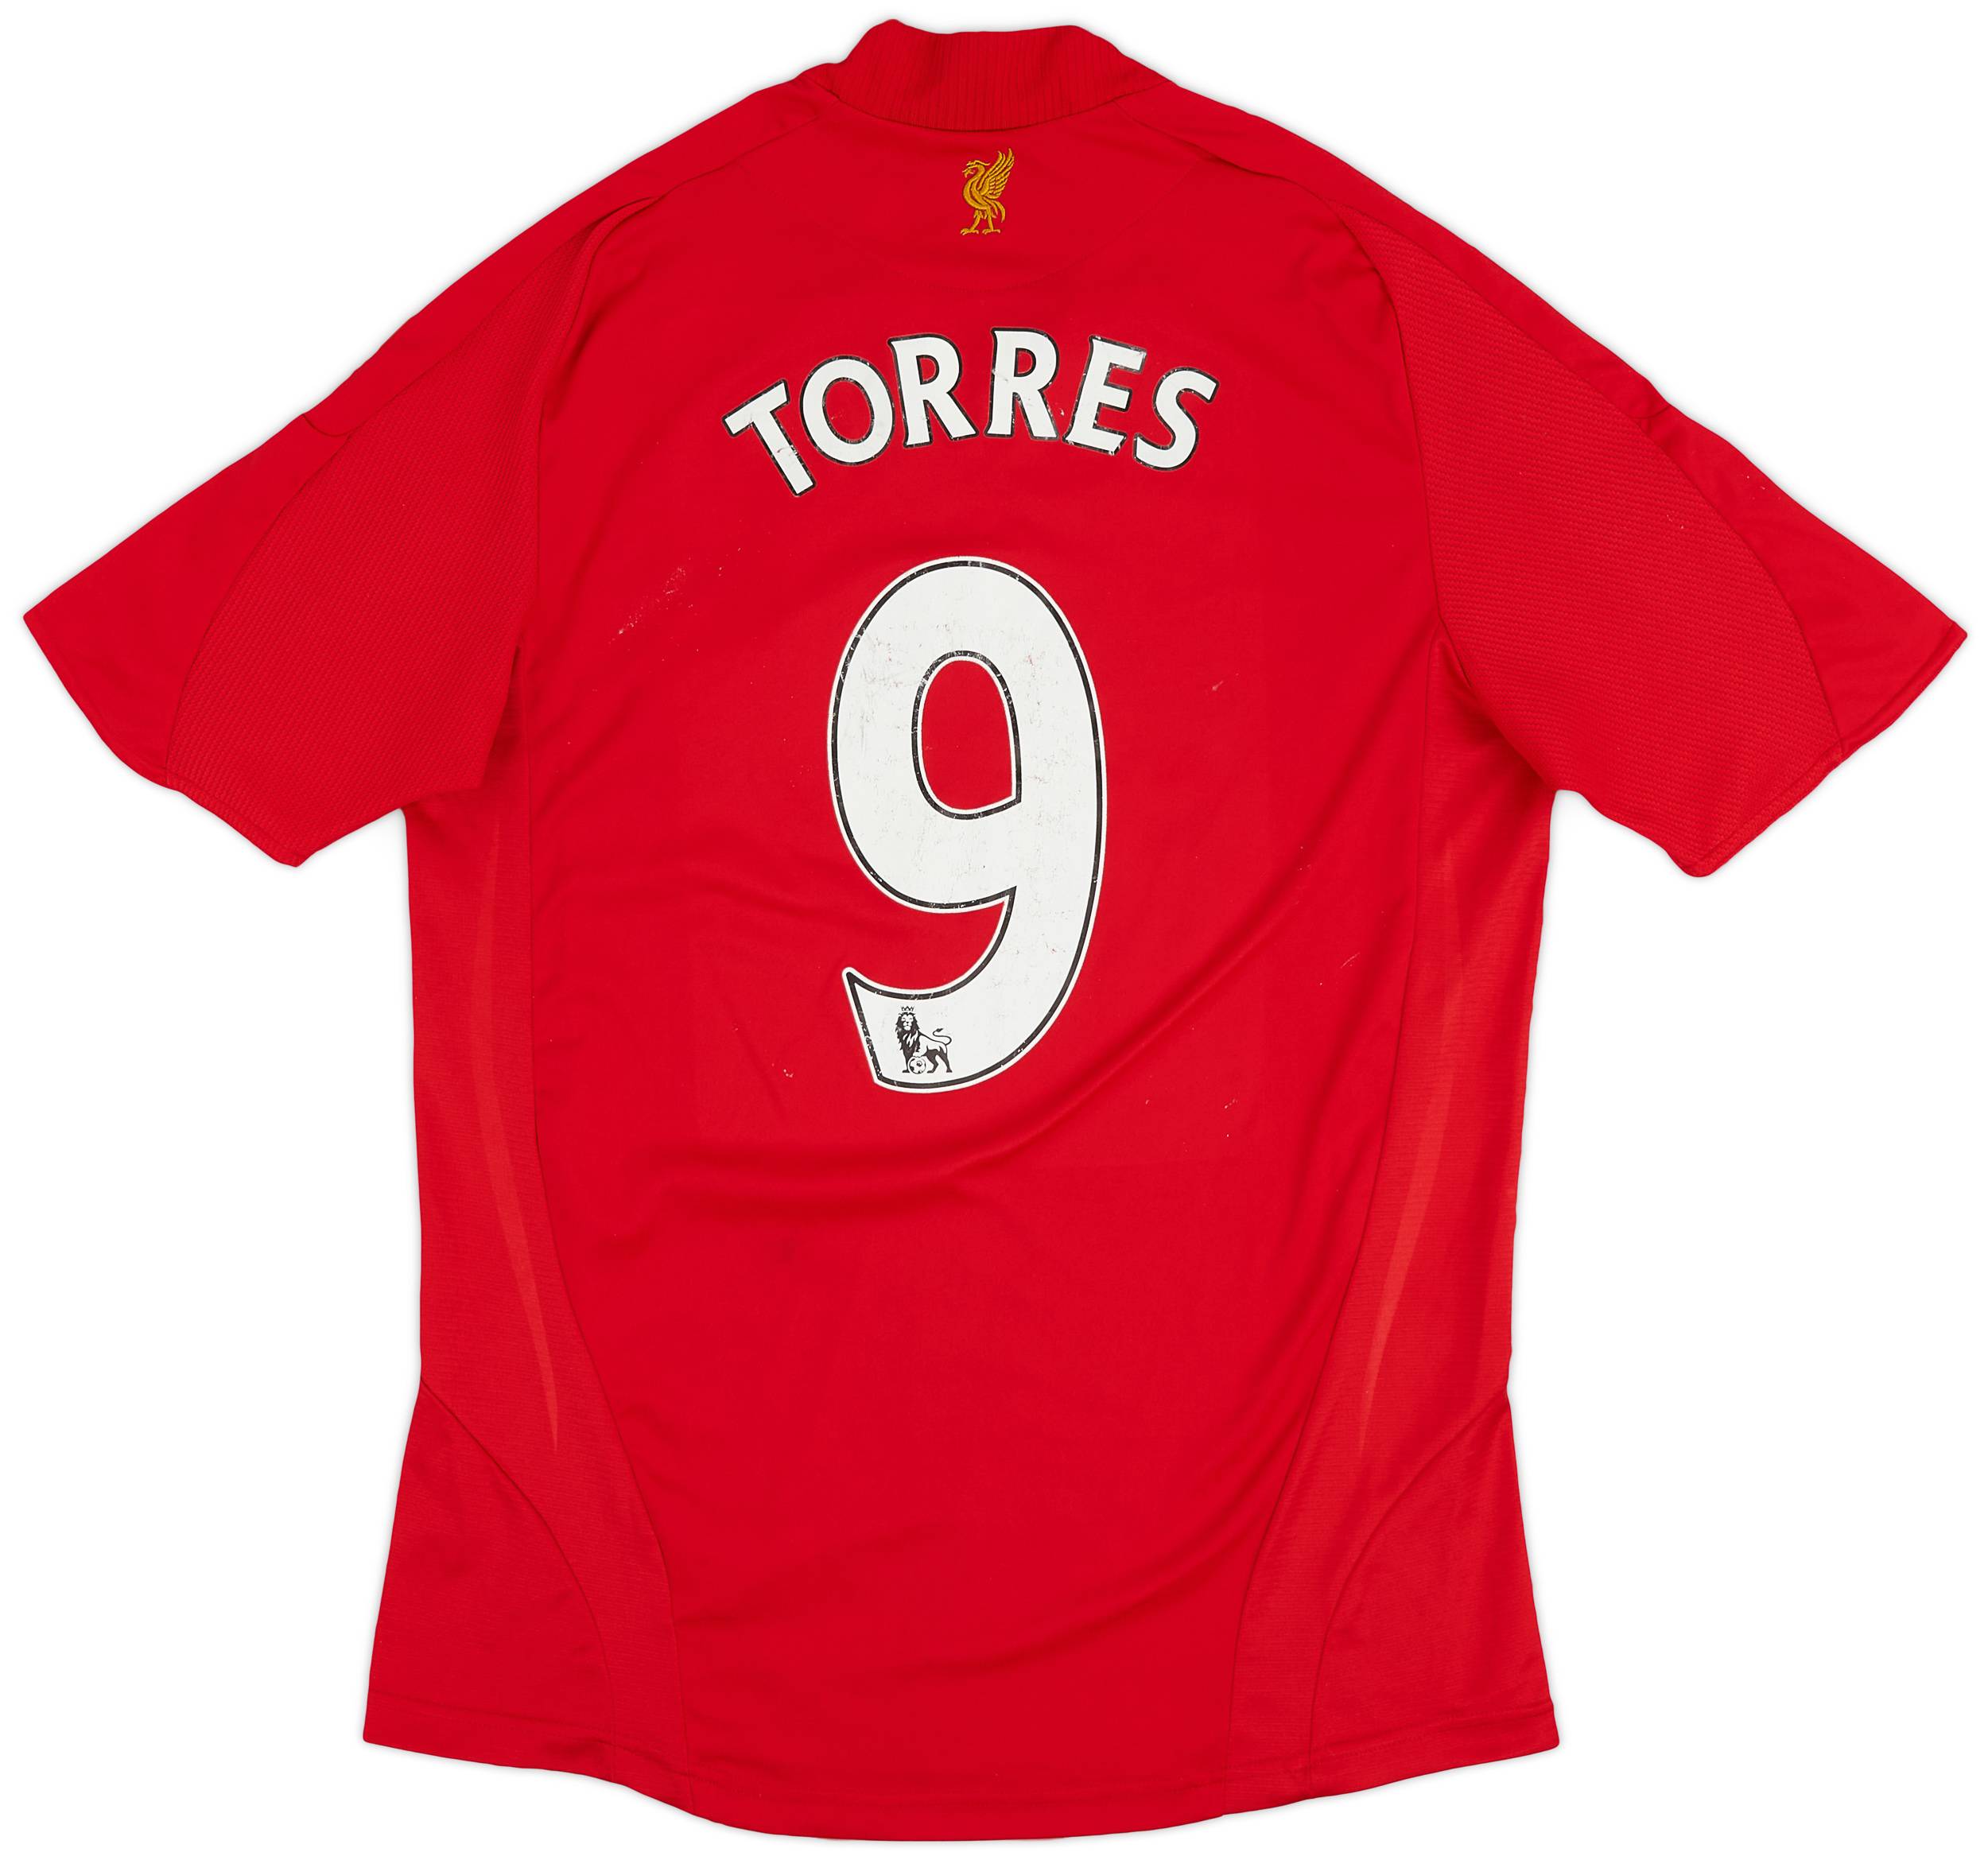 2008-10 Liverpool Home Shirt Torres #9 - 5/10 - (S)